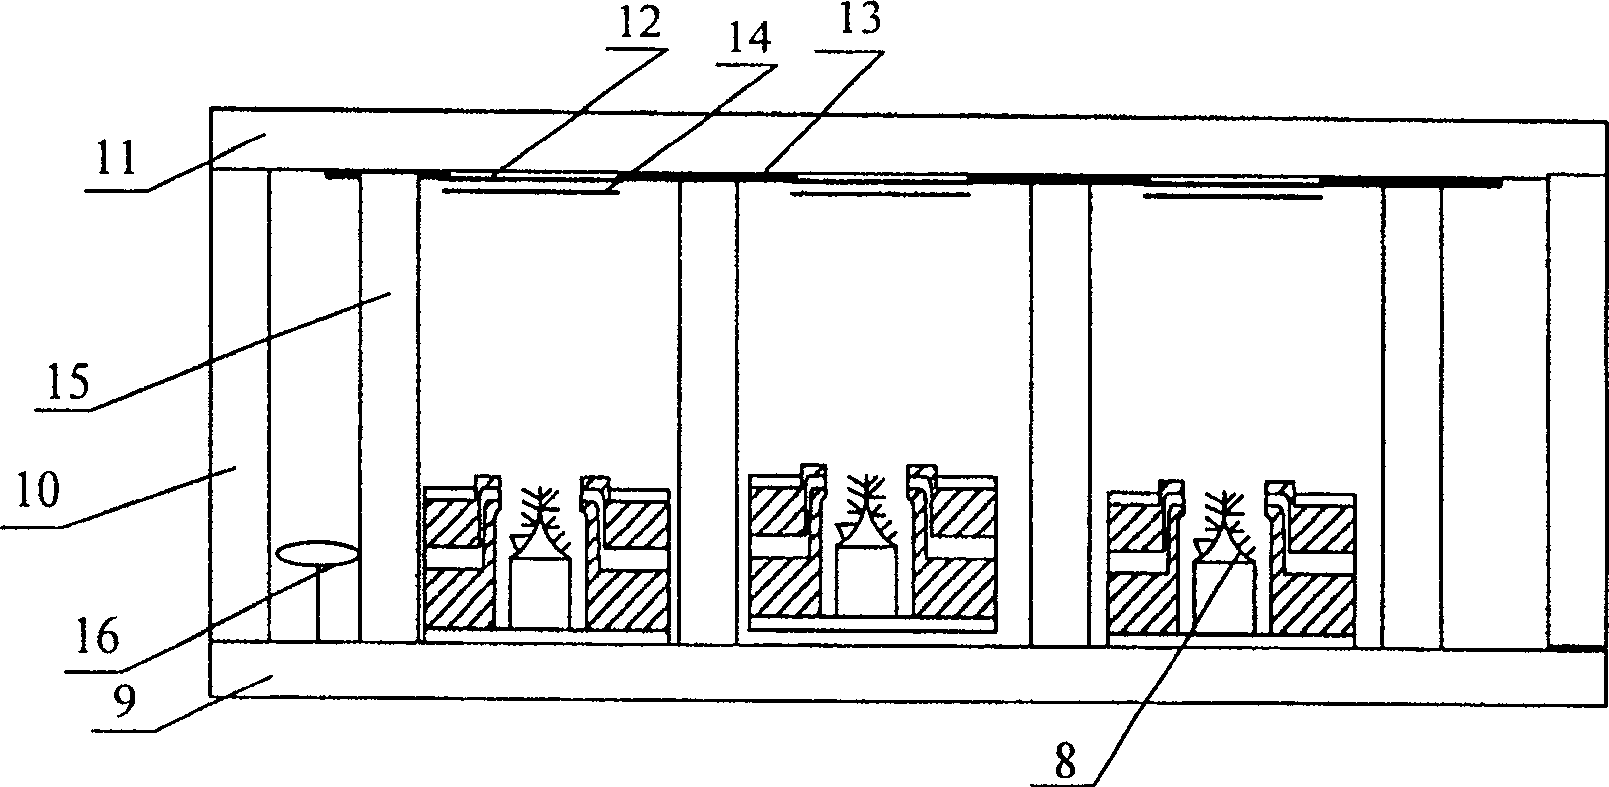 Flat panel display with integrated double flat grid array structure and its producing process